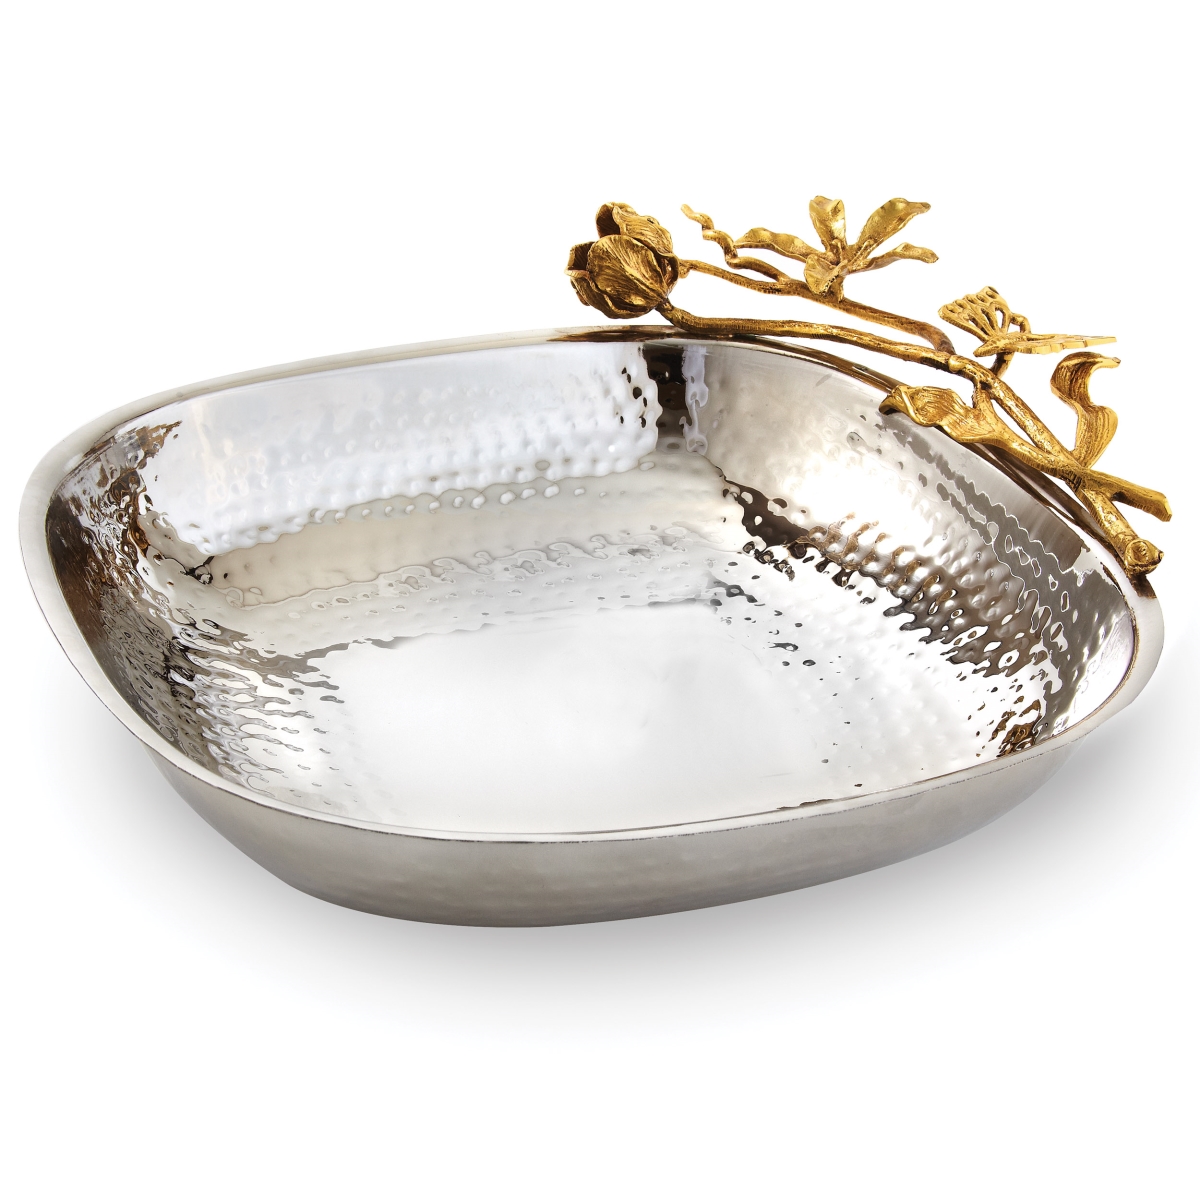 70066 10.5 X 2.75 In. Butterfly Large Square Serving Bowl, Silver & Gold